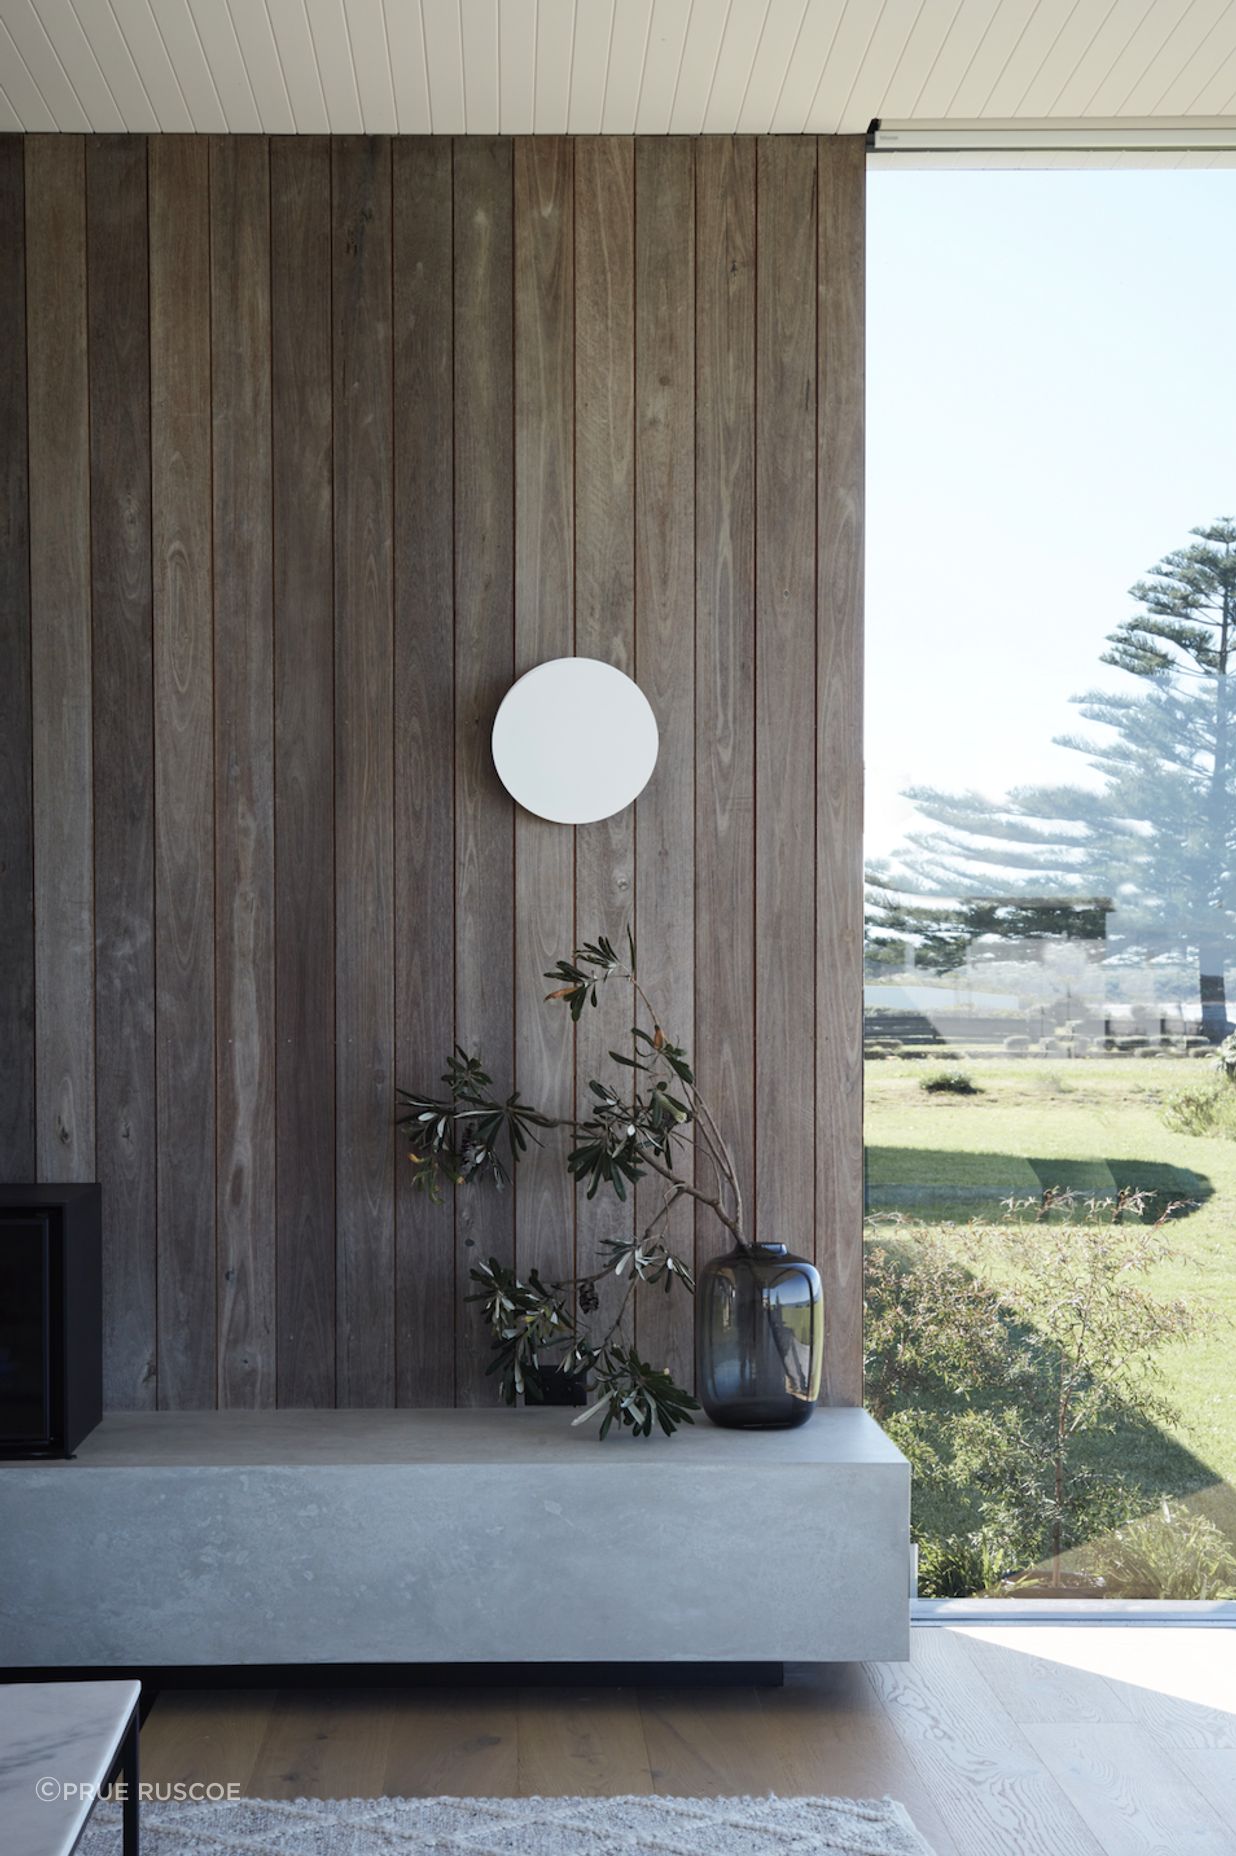 The home's weathered texture echoes the Australian landscape's inherent longevity and resilience.